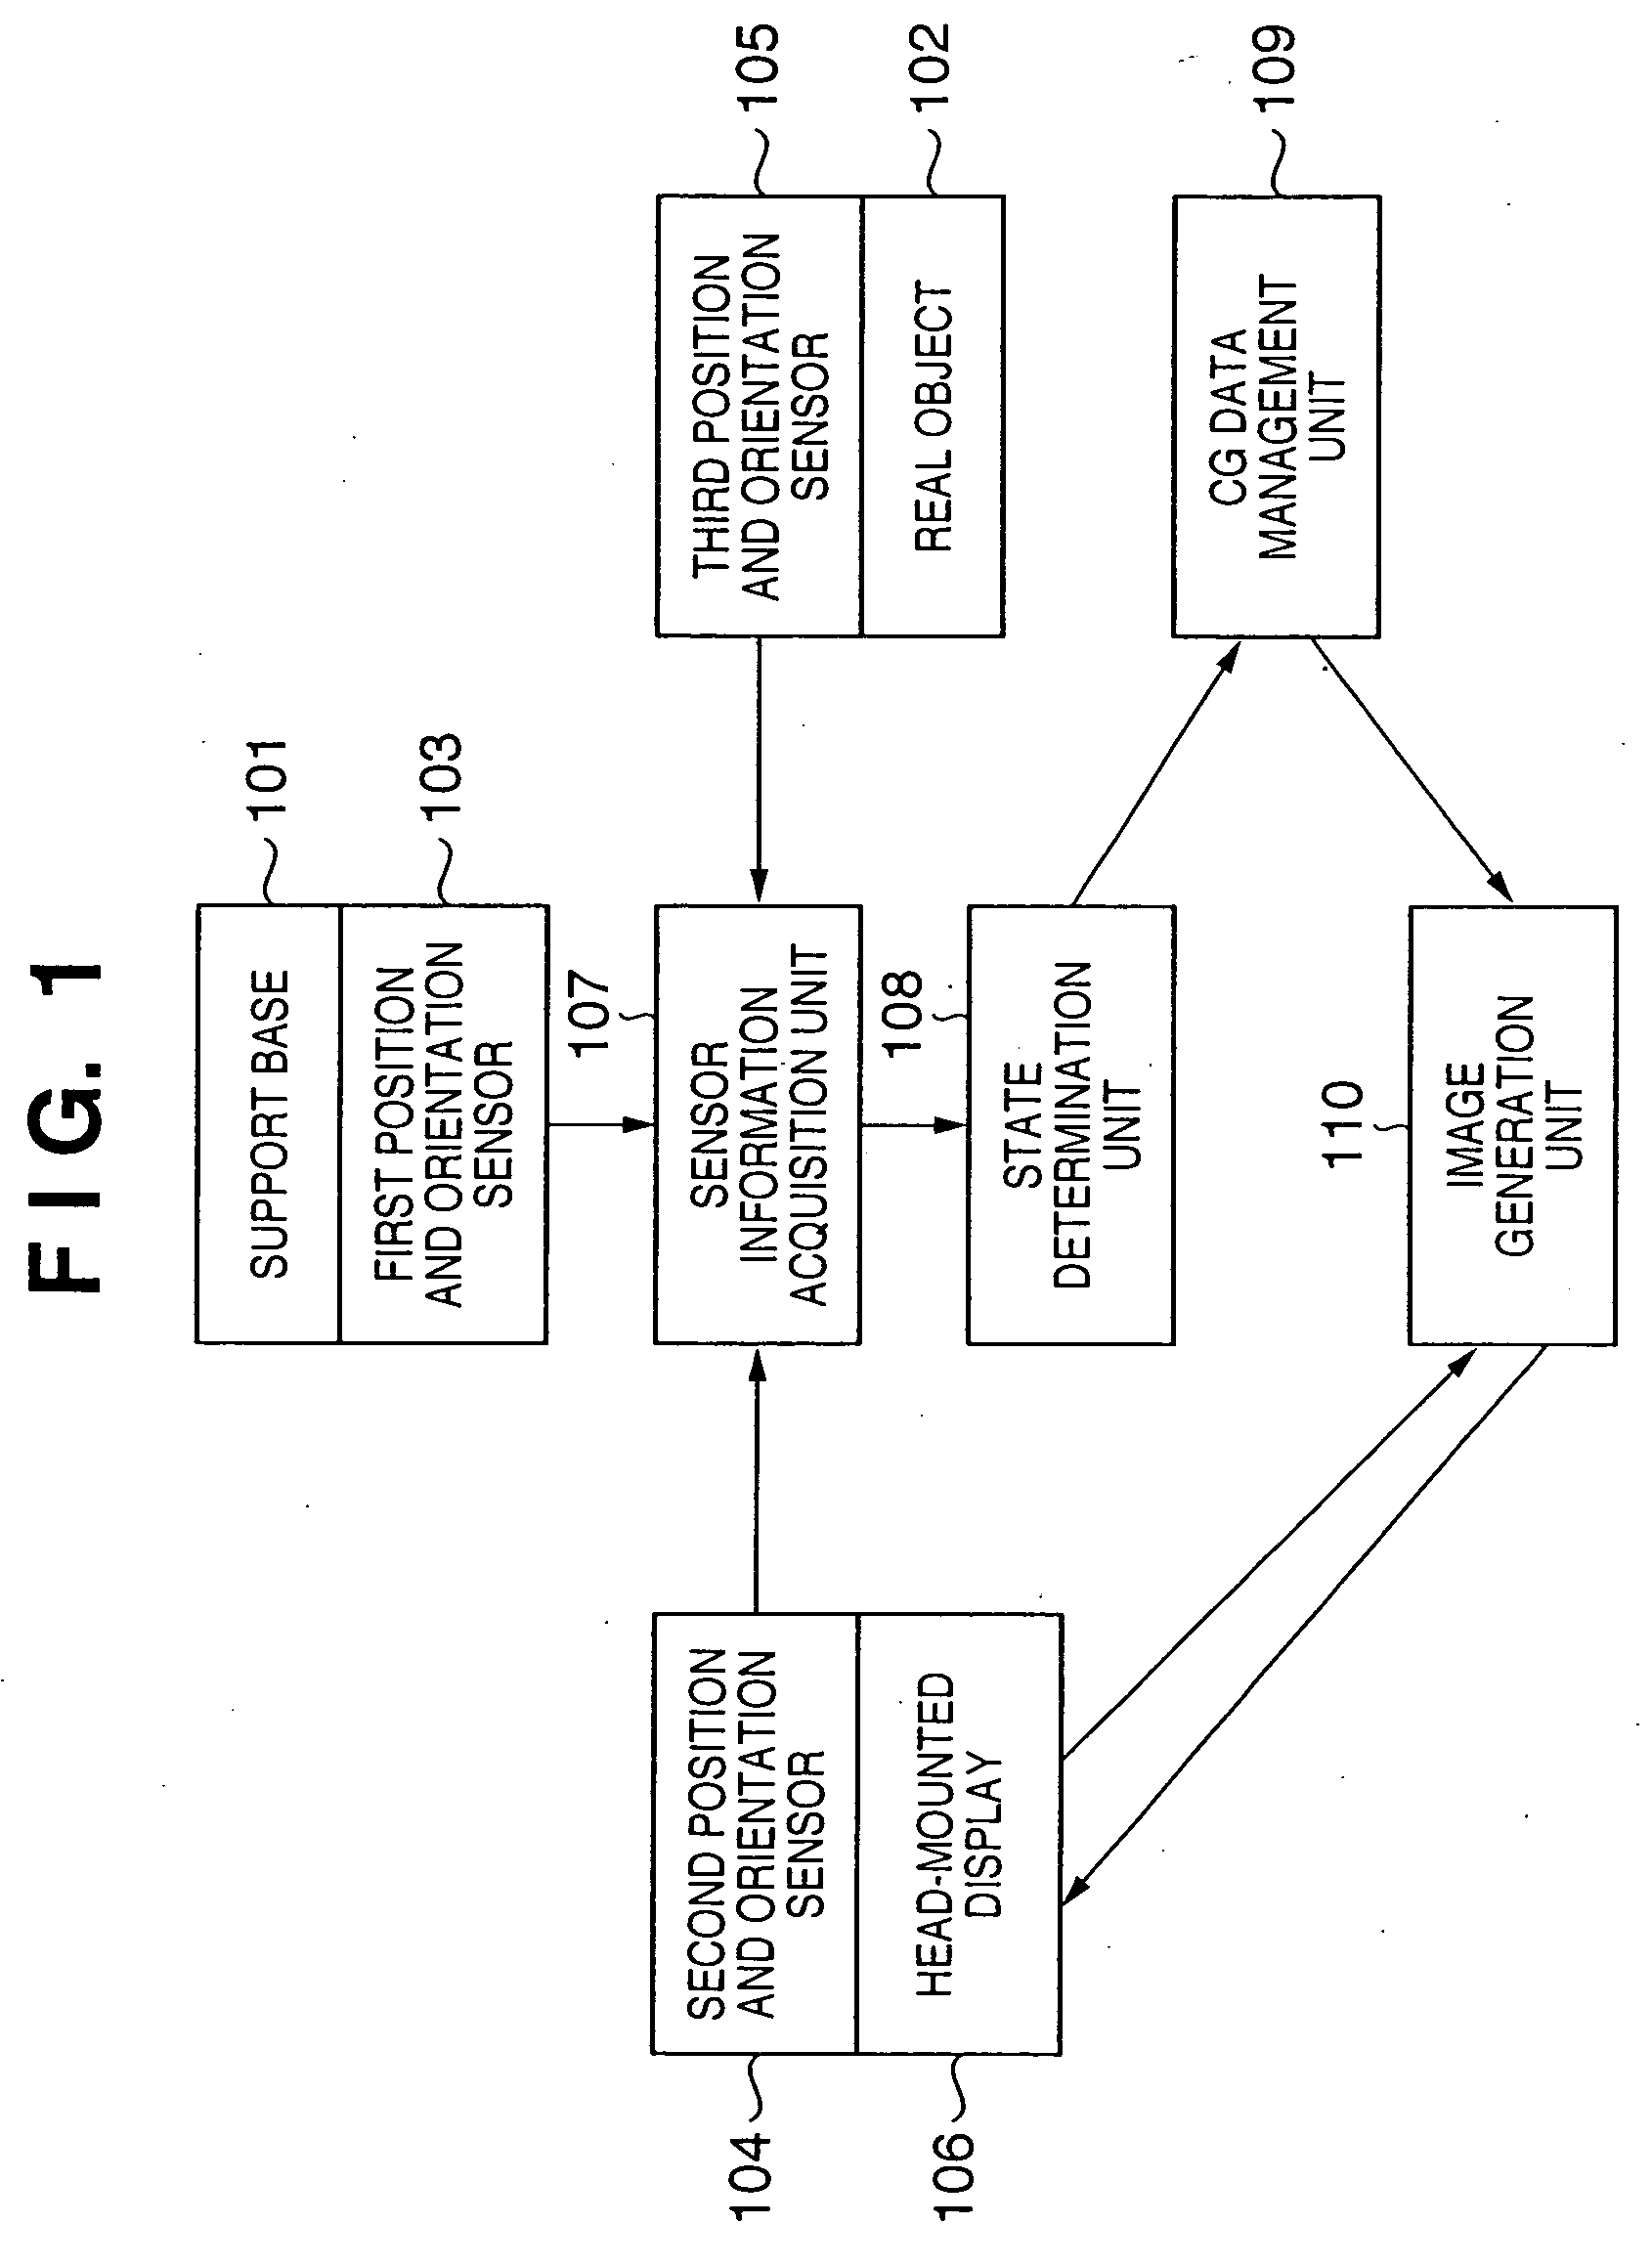 Image processing apparatus and method, and calibration device for position and orientation sensor